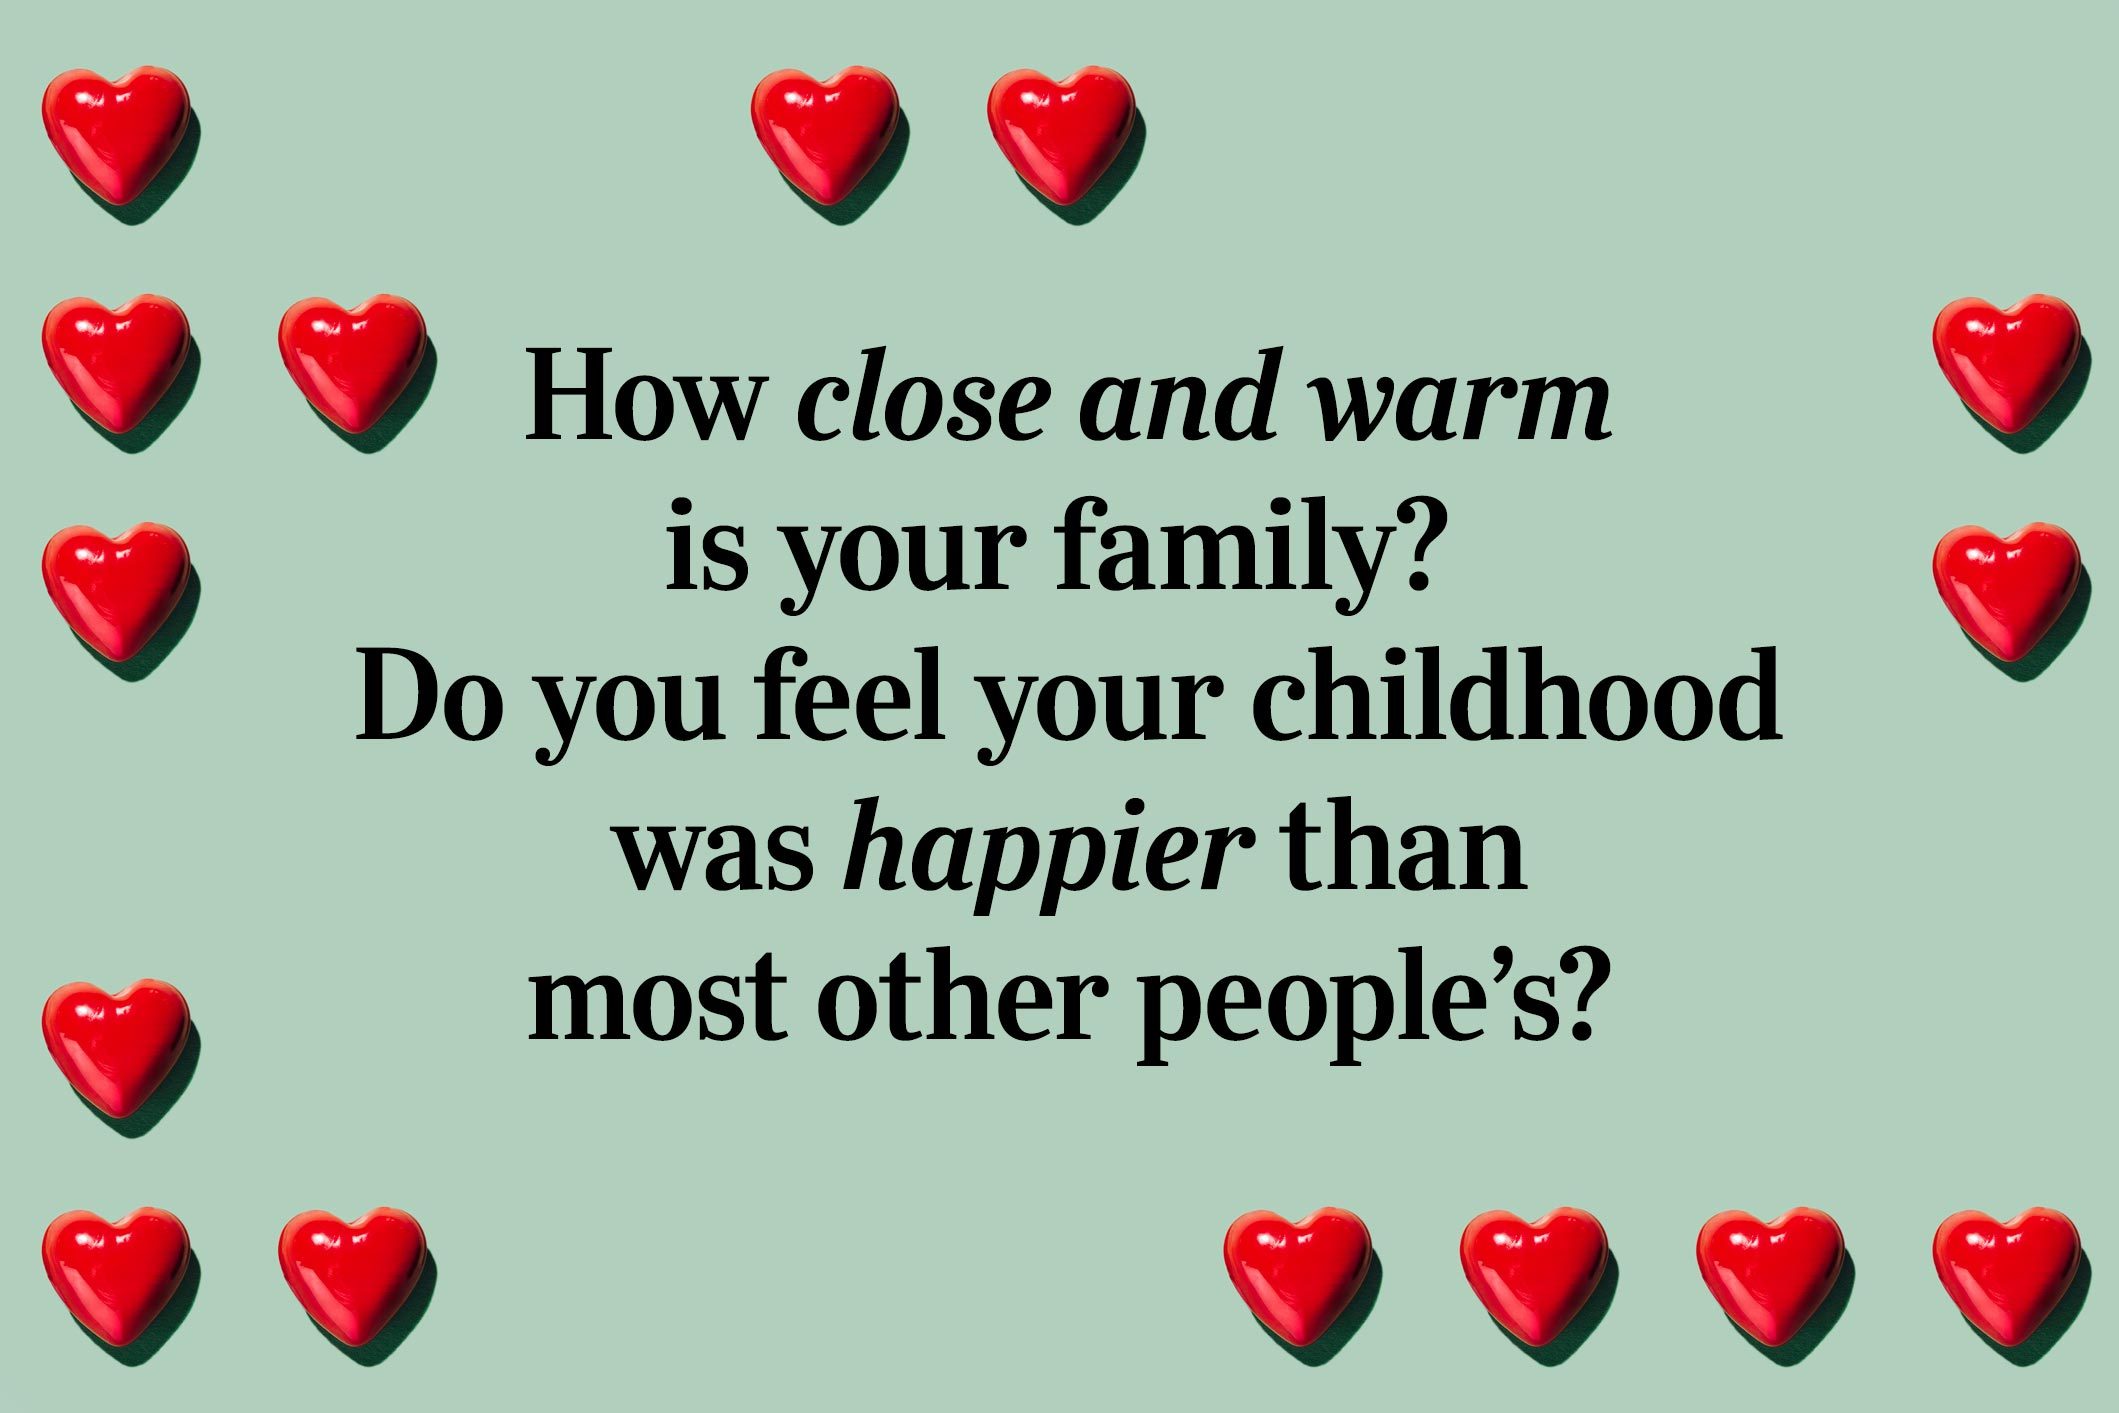 <p>How close and warm is your family? Do you feel your childhood was happier than most other people’s?</p>